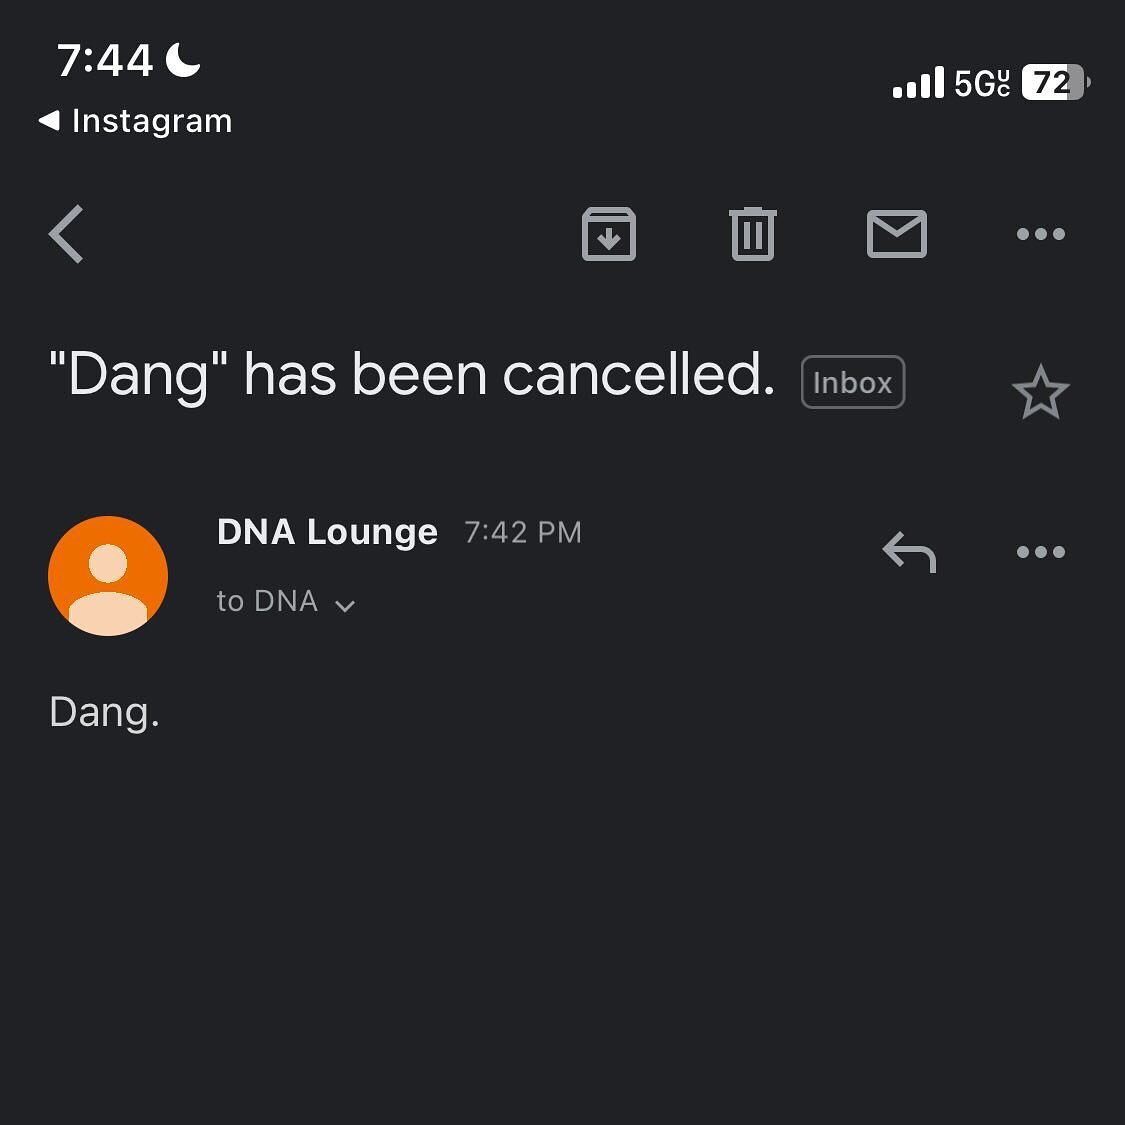 San Francisco&hellip; our next date at DNA Lounge is cancelled. But do not worry.
We have an amazing new venue we will be taking over in June. 
Stay tuned for announcement! 
We will be back very very soon 🙌🪩